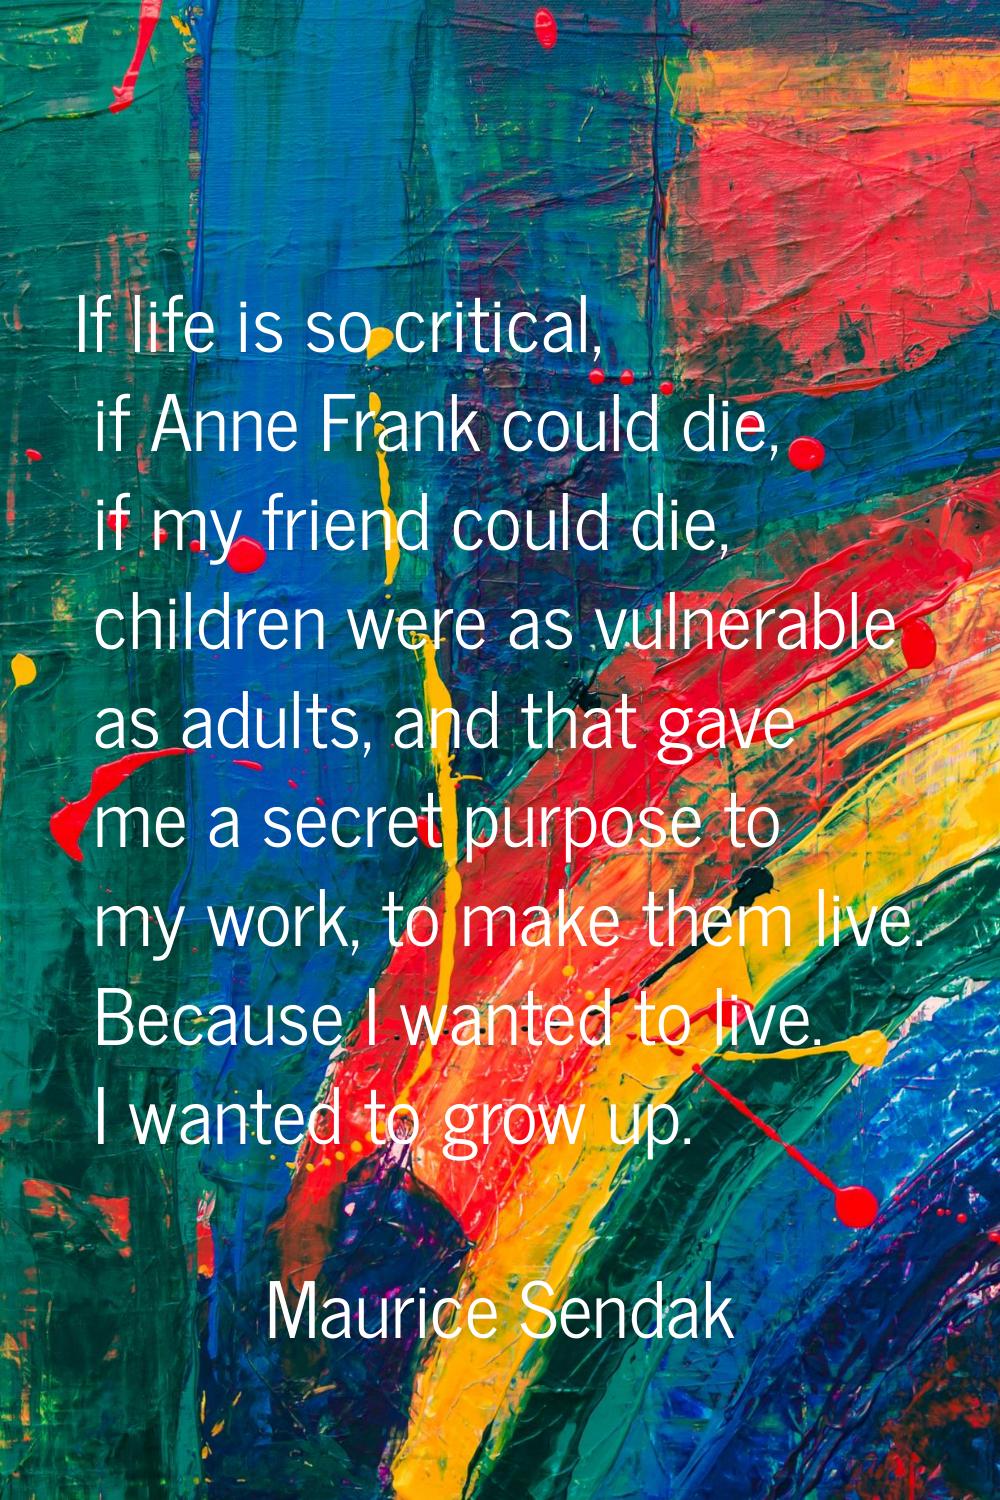 If life is so critical, if Anne Frank could die, if my friend could die, children were as vulnerabl